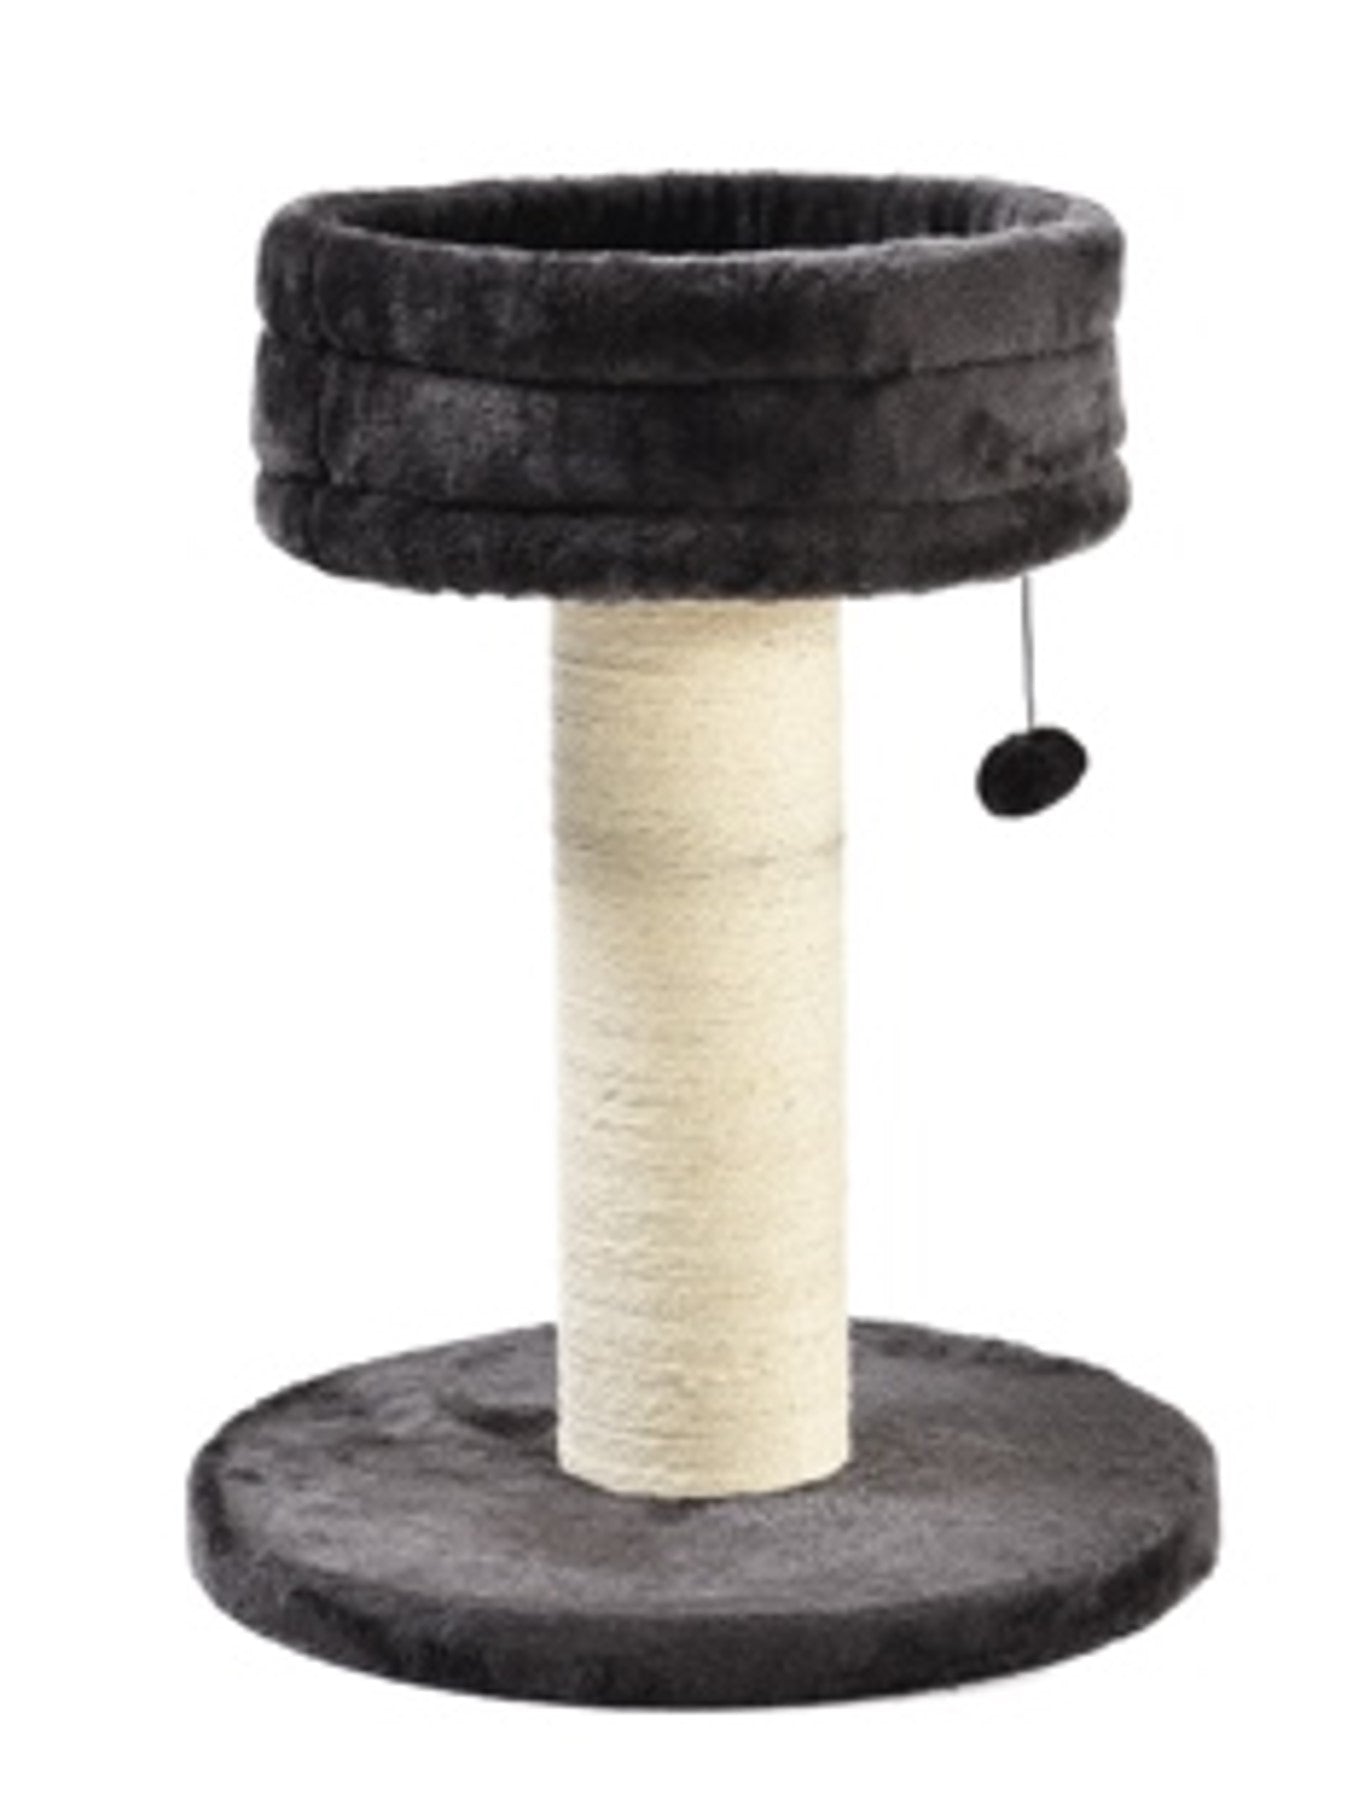 Cat Craft Carpet Scratching Posts and Elevated Beds for Indoor Cats